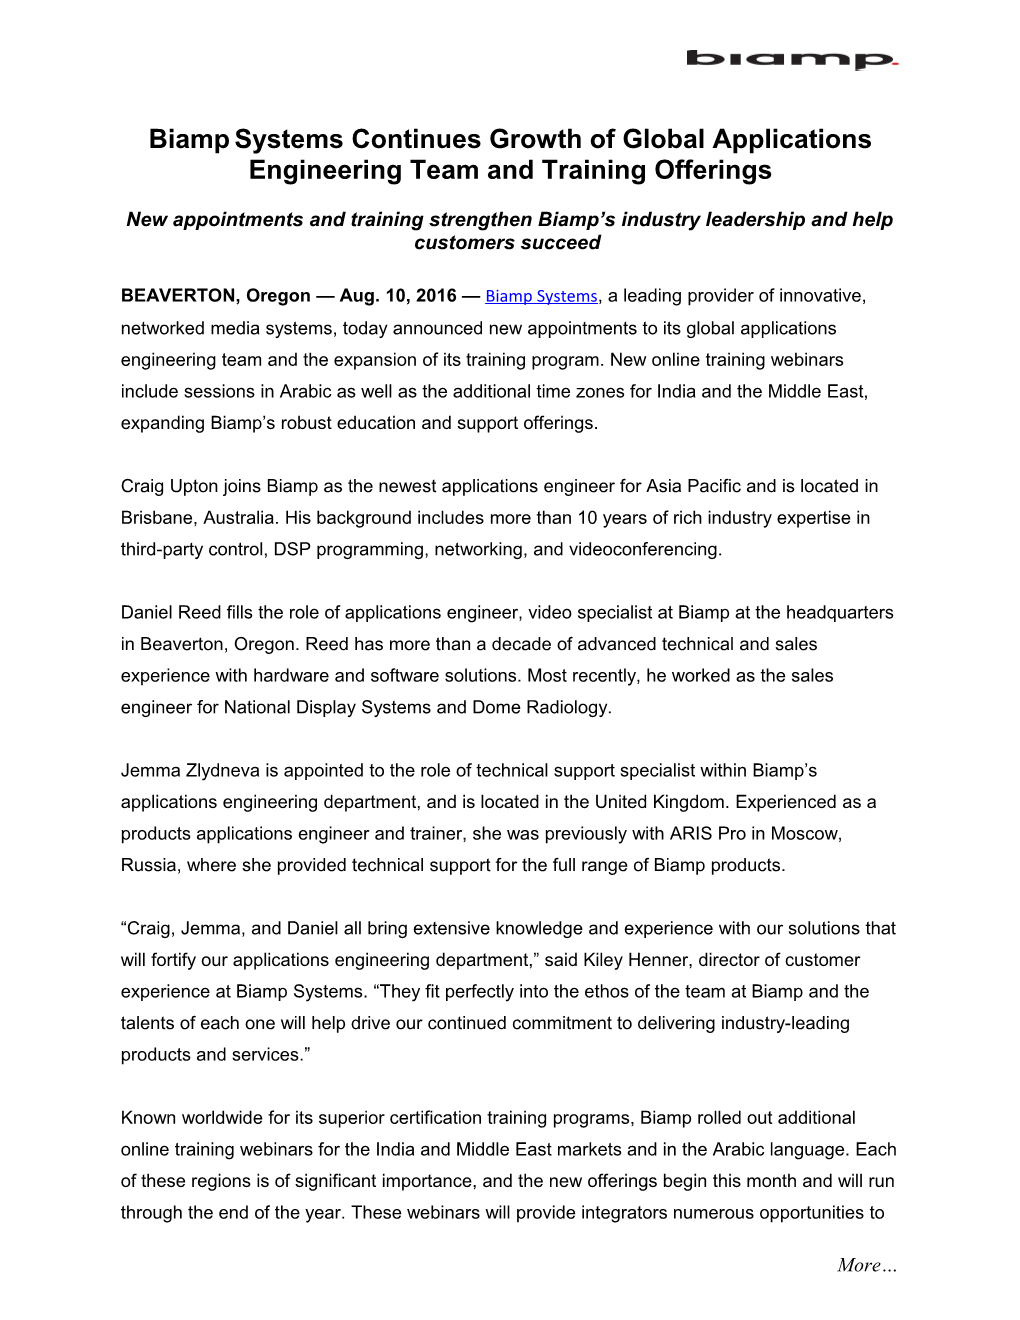 Biamp Systems Continues Growth of Global Applications Engineering Team and Training Offerings